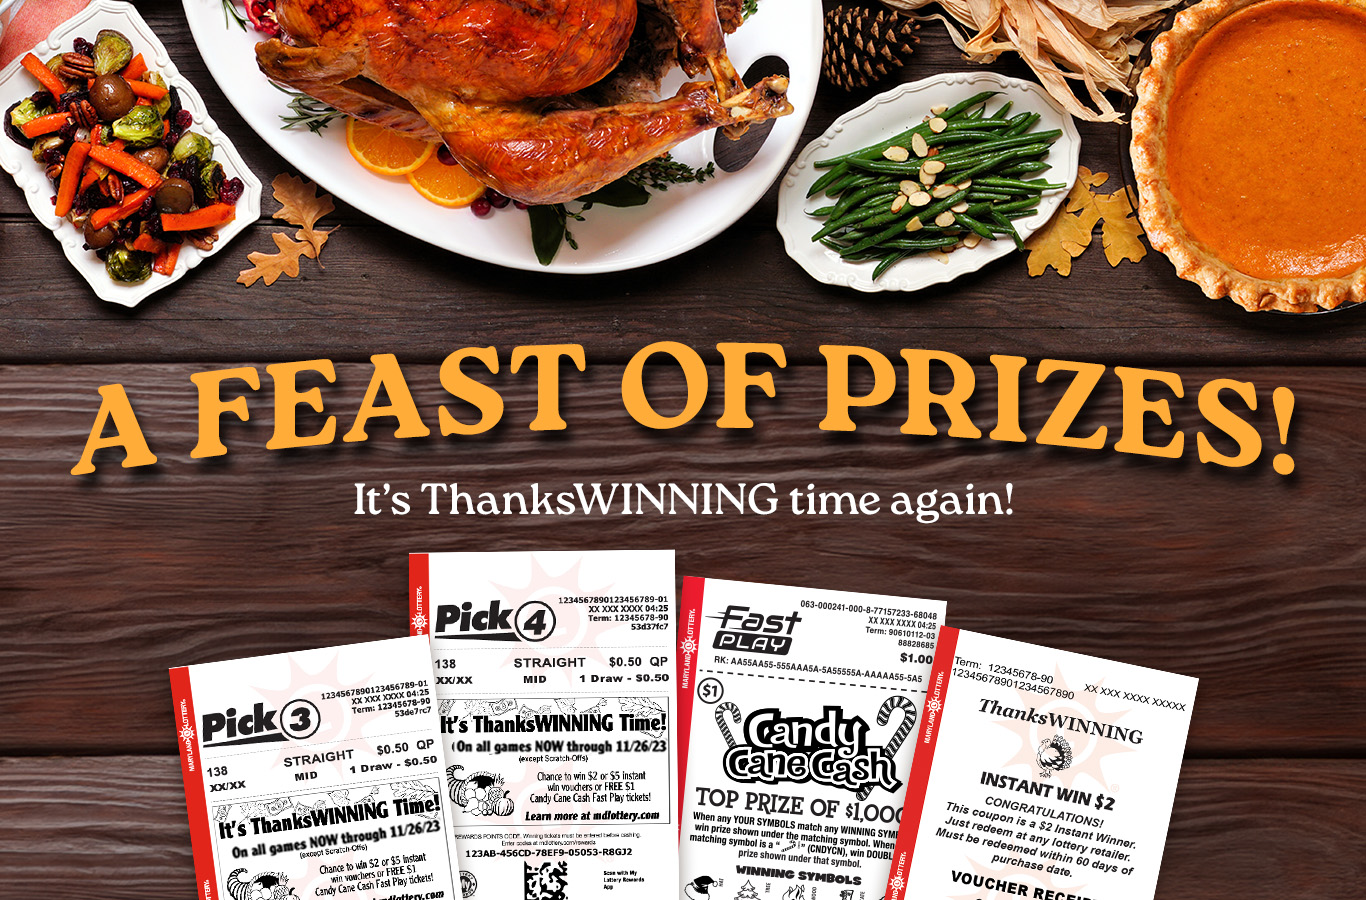 A feast of instant prizes. Play any draw game and you could instantly win a $2 voucher, a $5 voucher, or a free Candy Cane Cash FAST PLAY ticket.